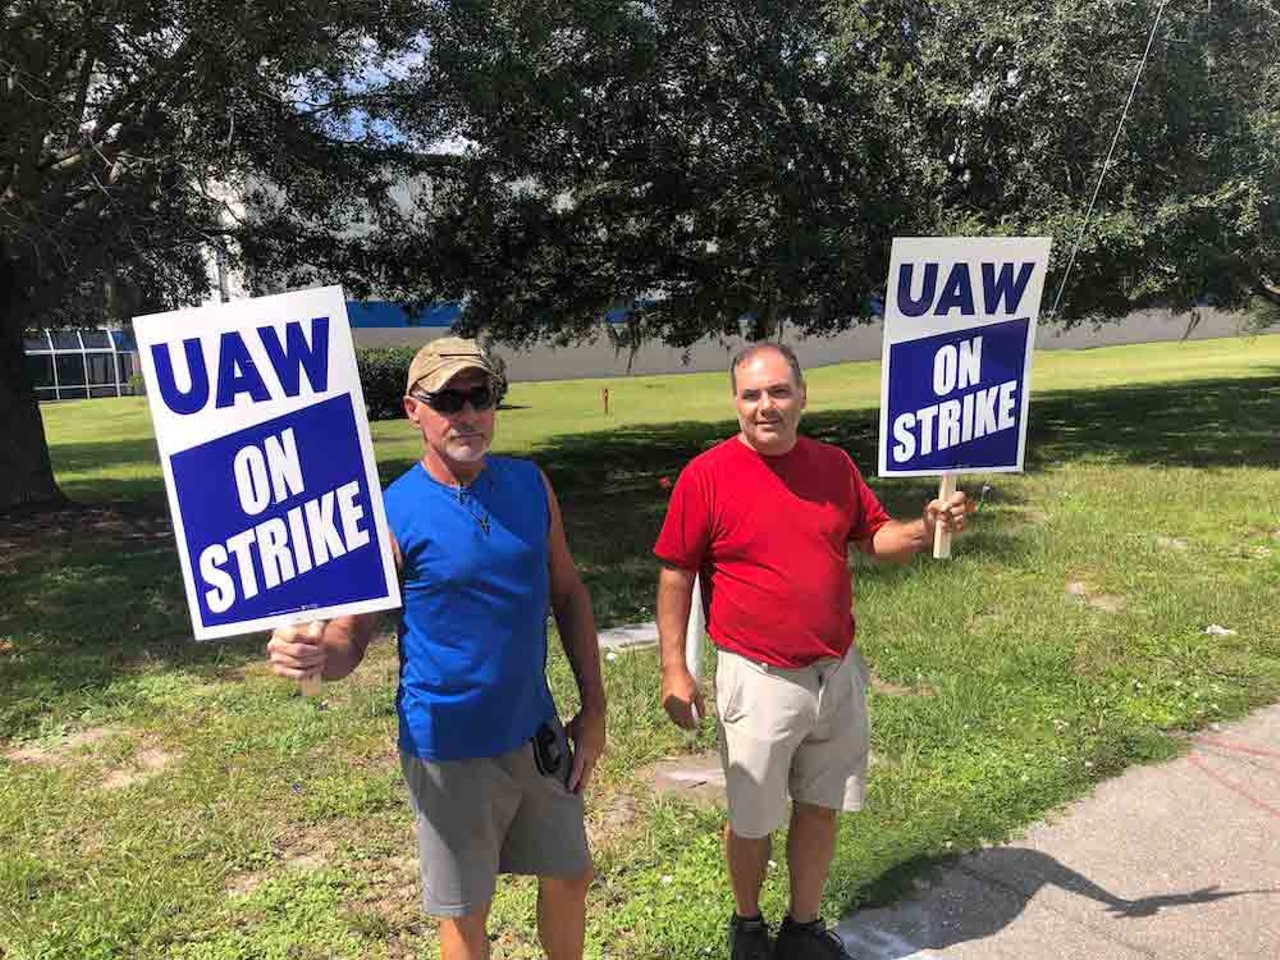 Orlando auto workers strike, joining thousands of UAW union members across the United States